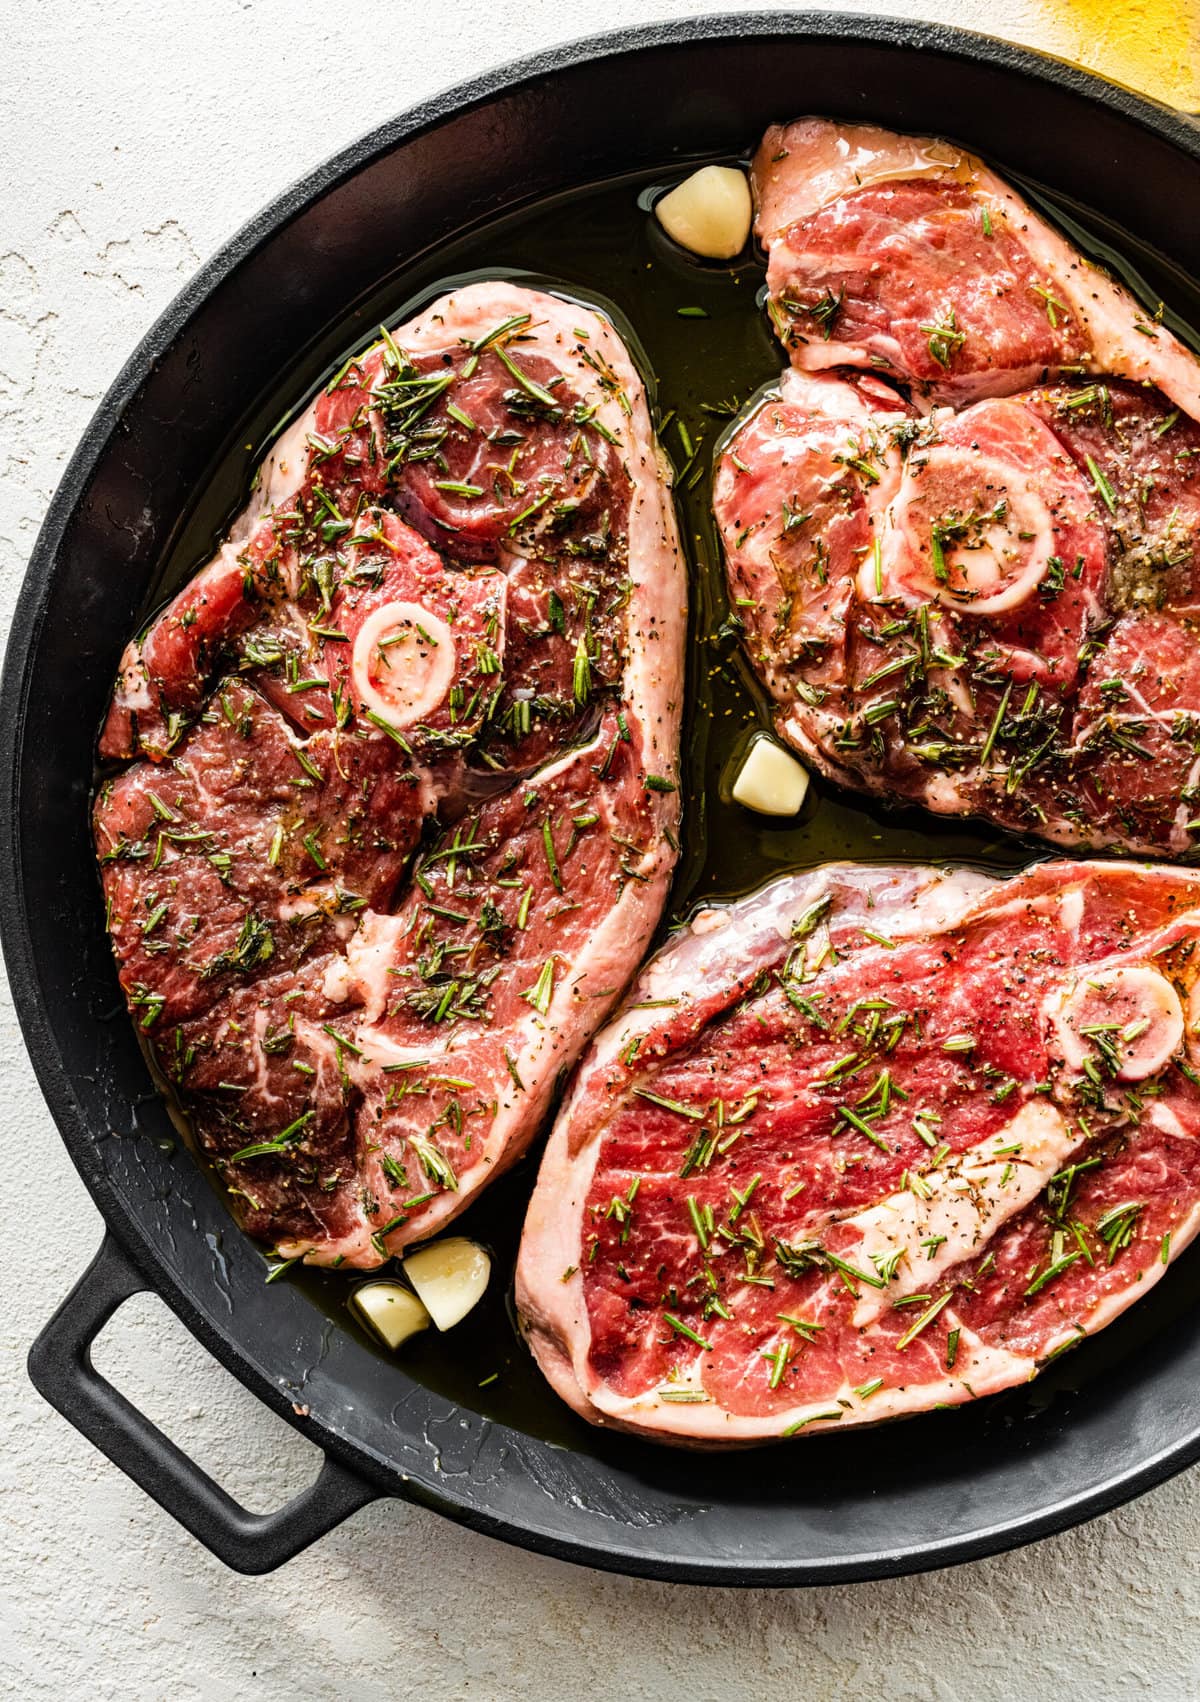 How to make lamb should chops step-by-step: cooking lamb chops on hot pan.